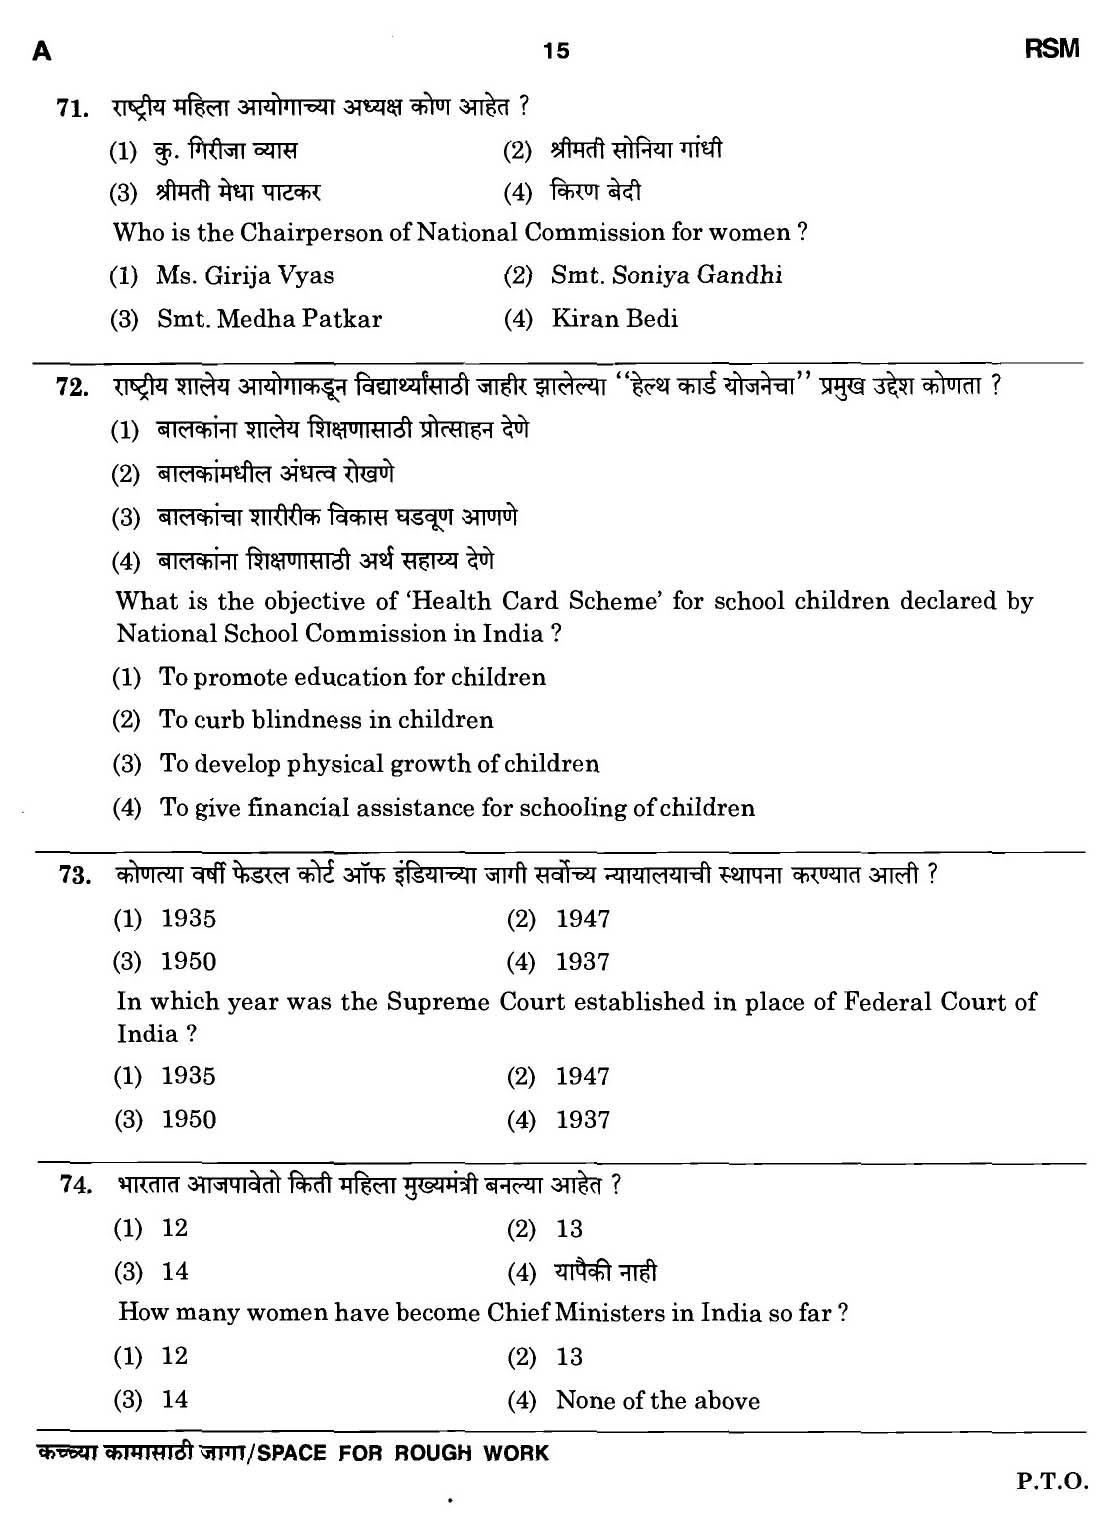 MPSC Agricultural Services Preliminary Exam 2011 Question Paper 14